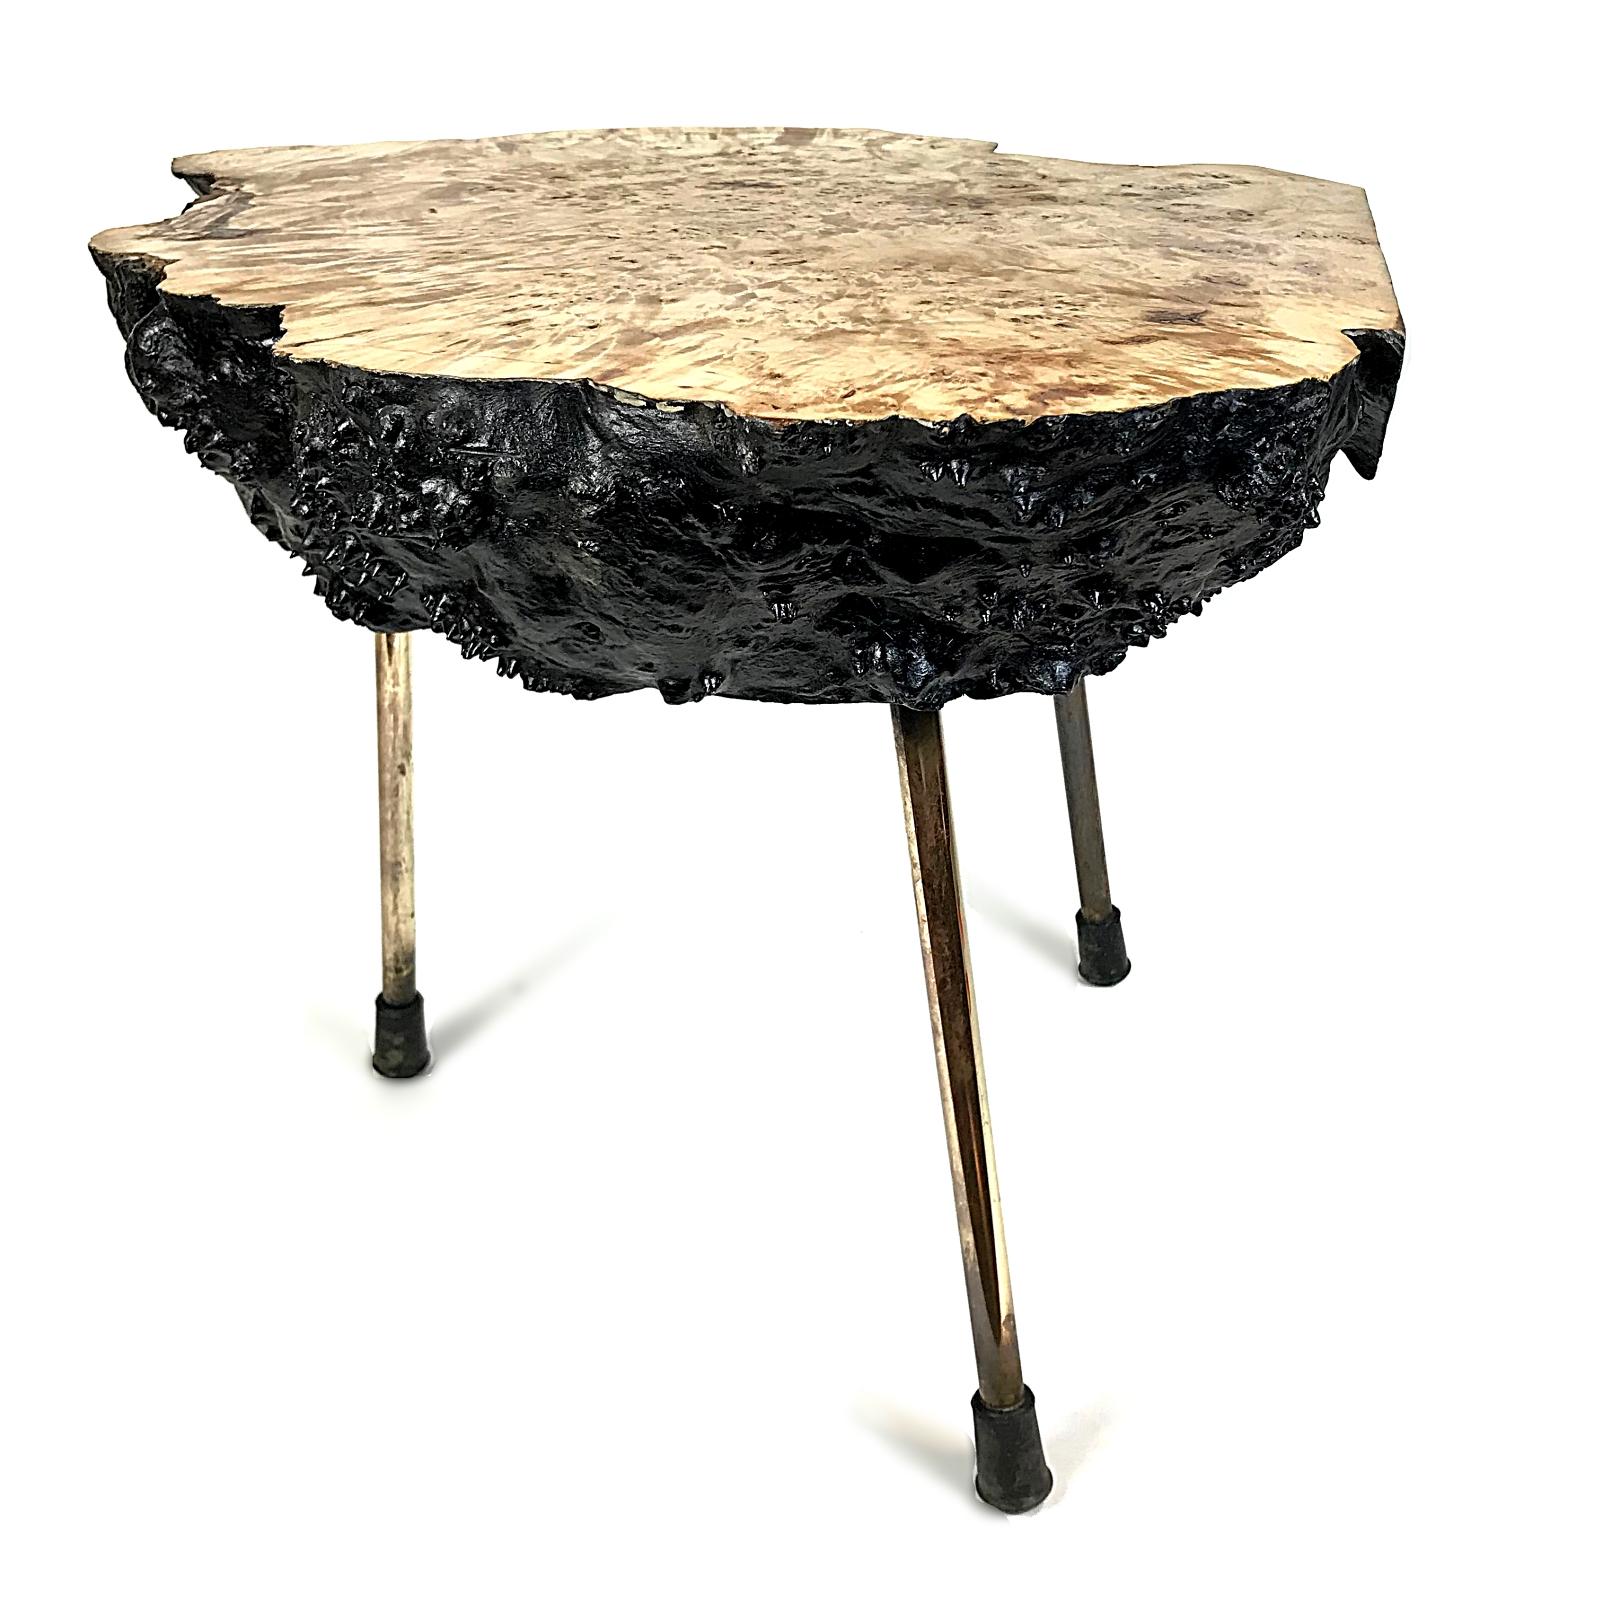 Beautiful tree trunk table by Carl Auböck. The table is made of burl walnut slub with three brass legs. The tabletop was shellack polished. The table is embossed with 'Auböck Made in Austria' on the bottom.

We ship via UPS-Express